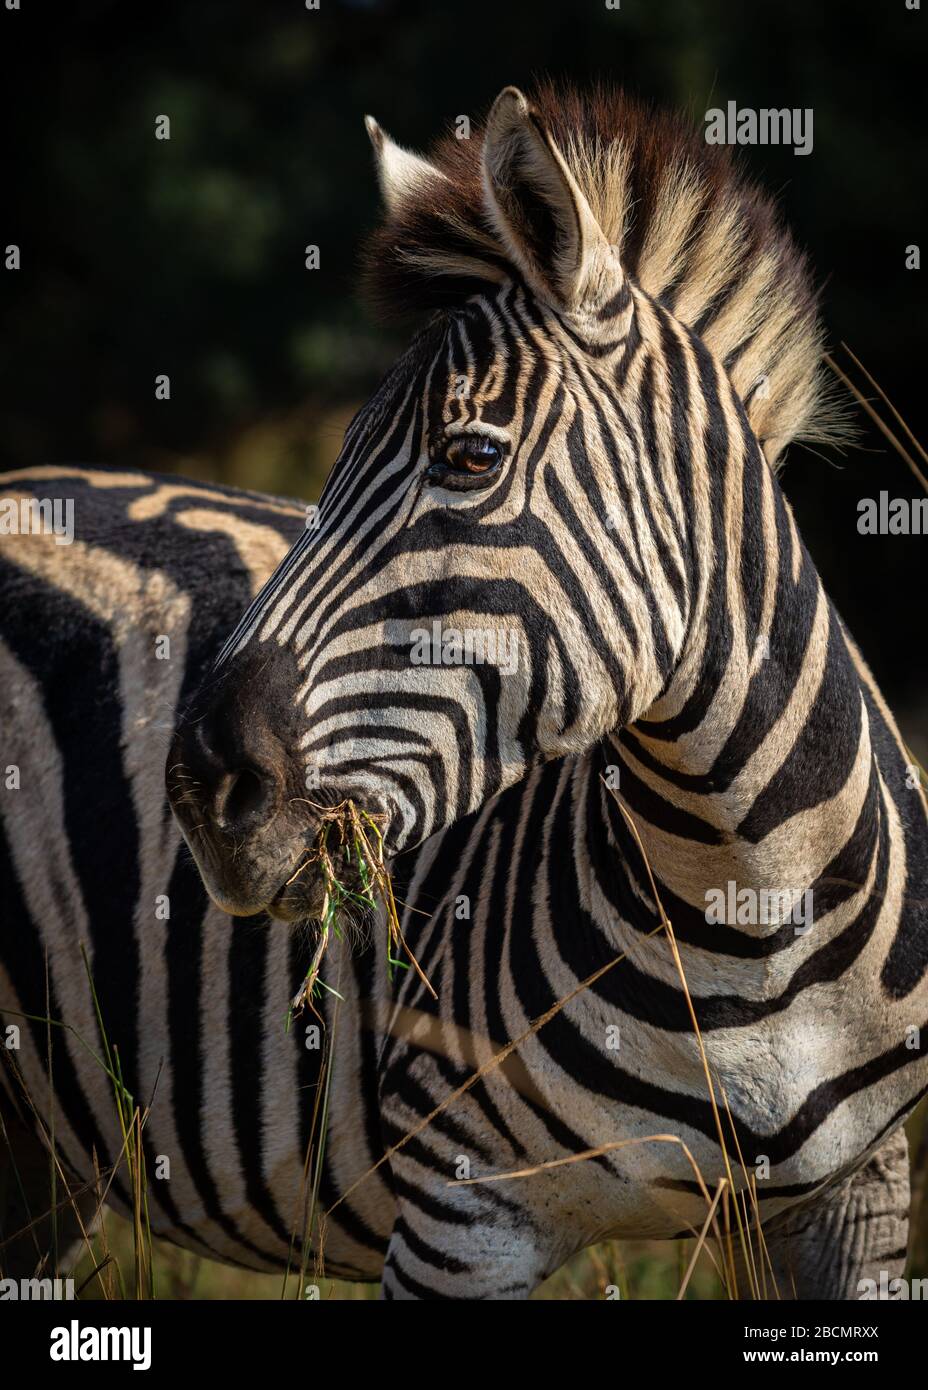 Wild Plains Zebras in South Africa. Stock Photo